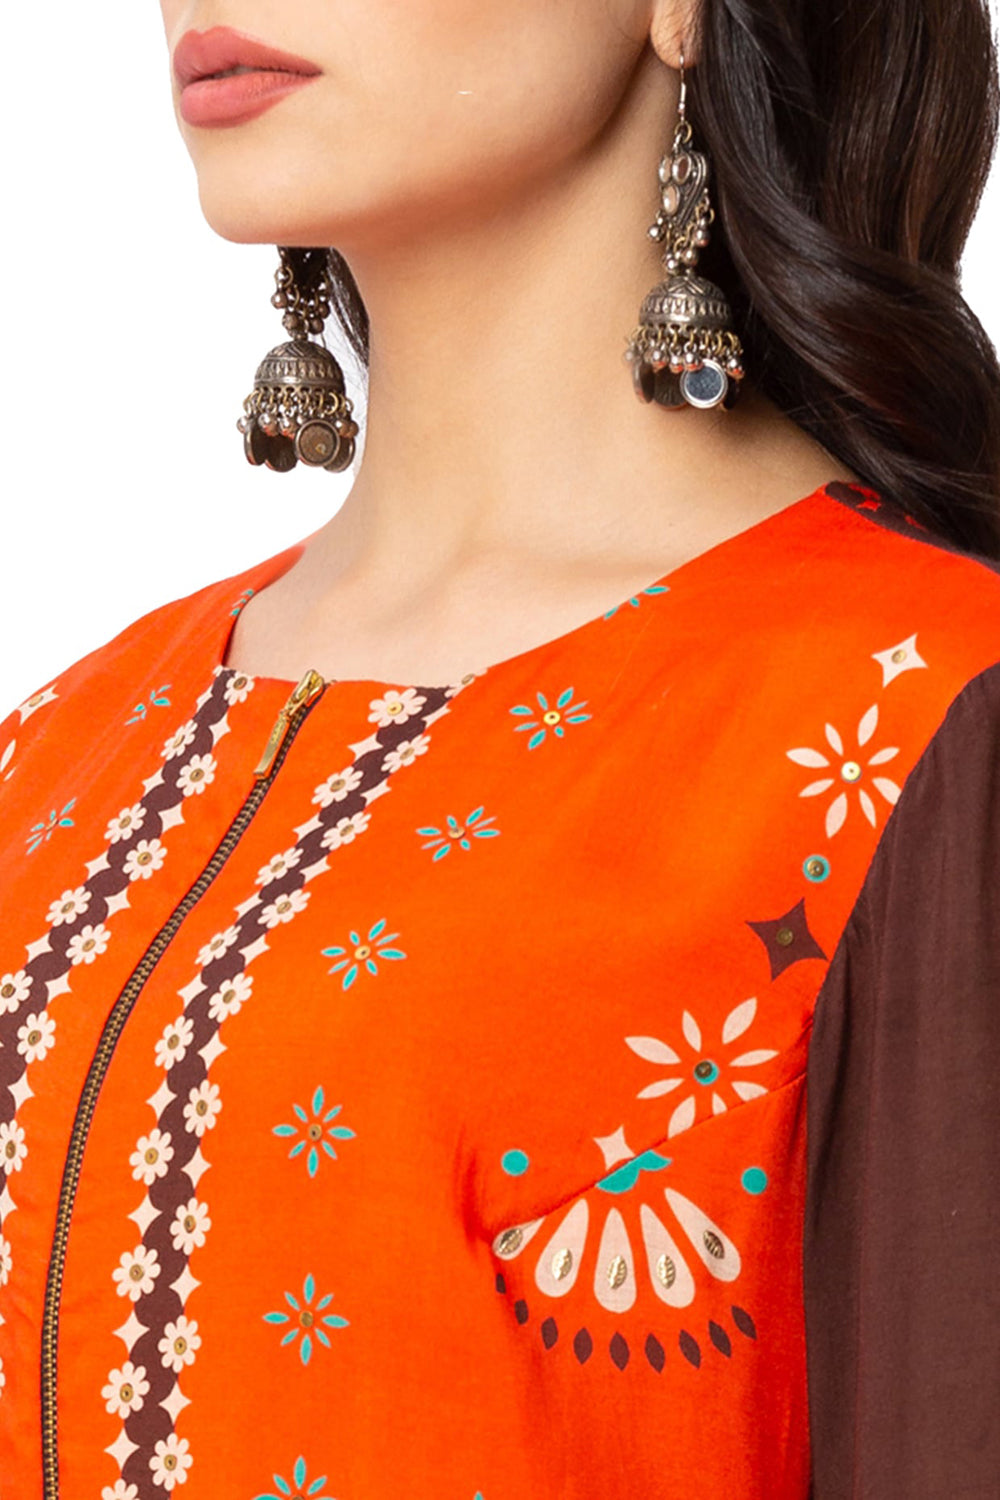 Printed Tunic With Bell Sleeves With Palazzos